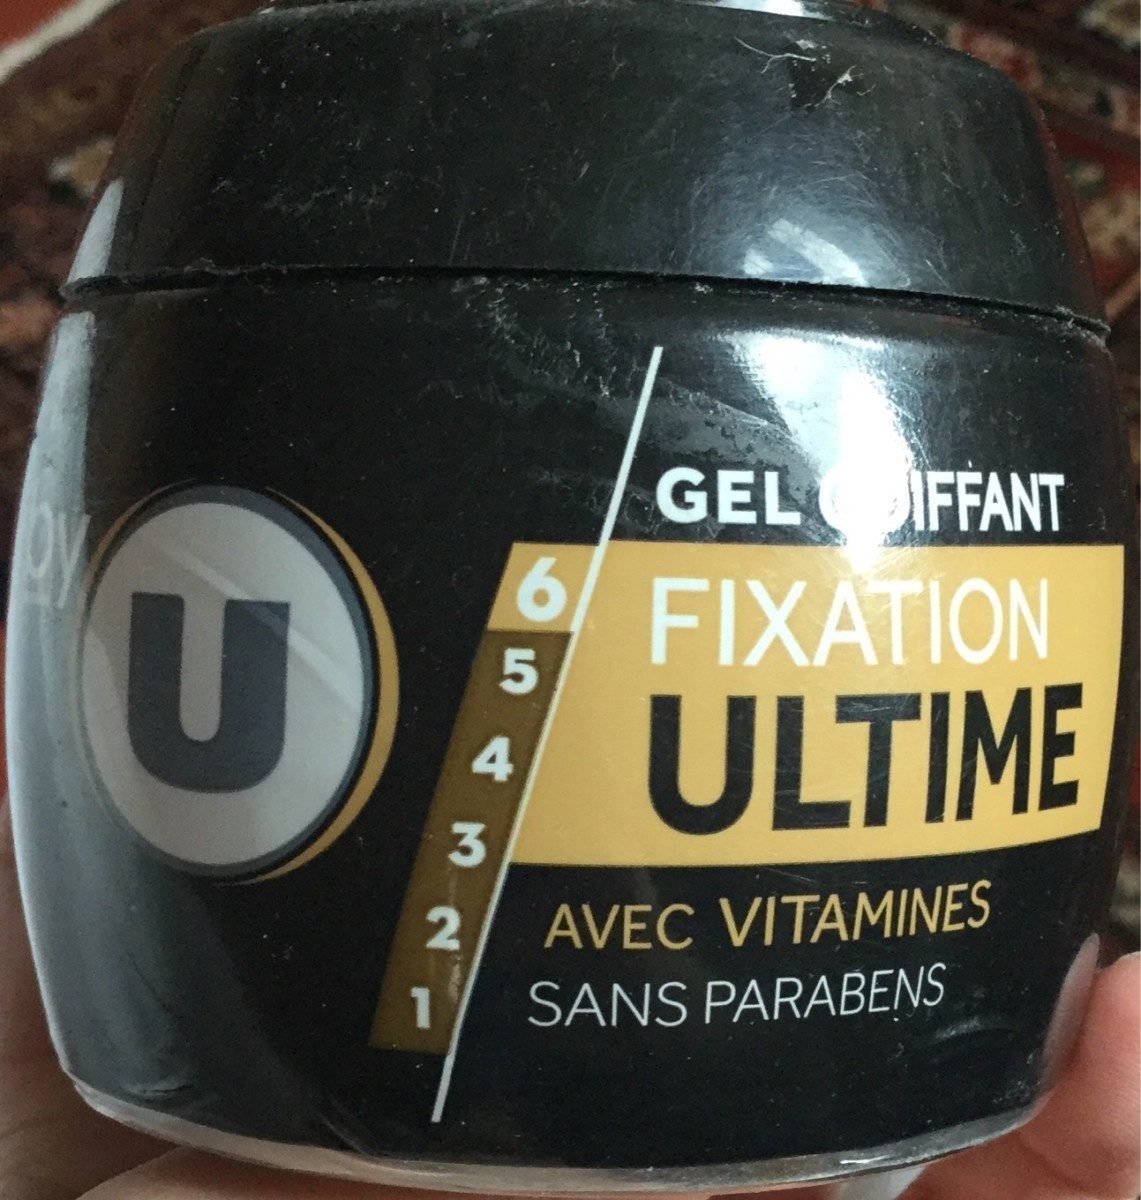 Gel ciffant fixation ultime - Tuote - fr